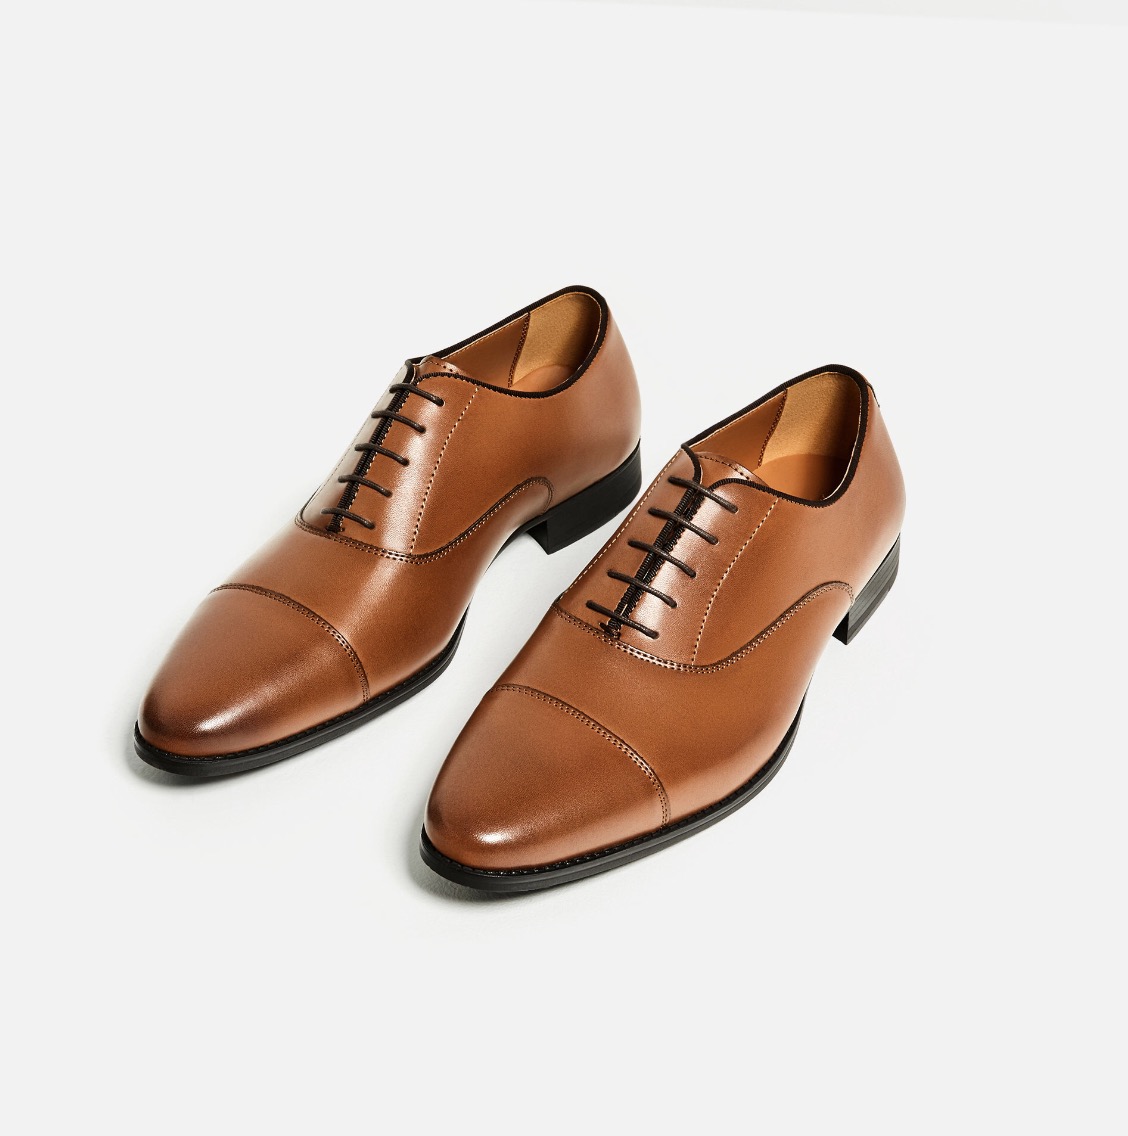 Black Smart Leather Shoe with Brogueing | SUIT ADDICT